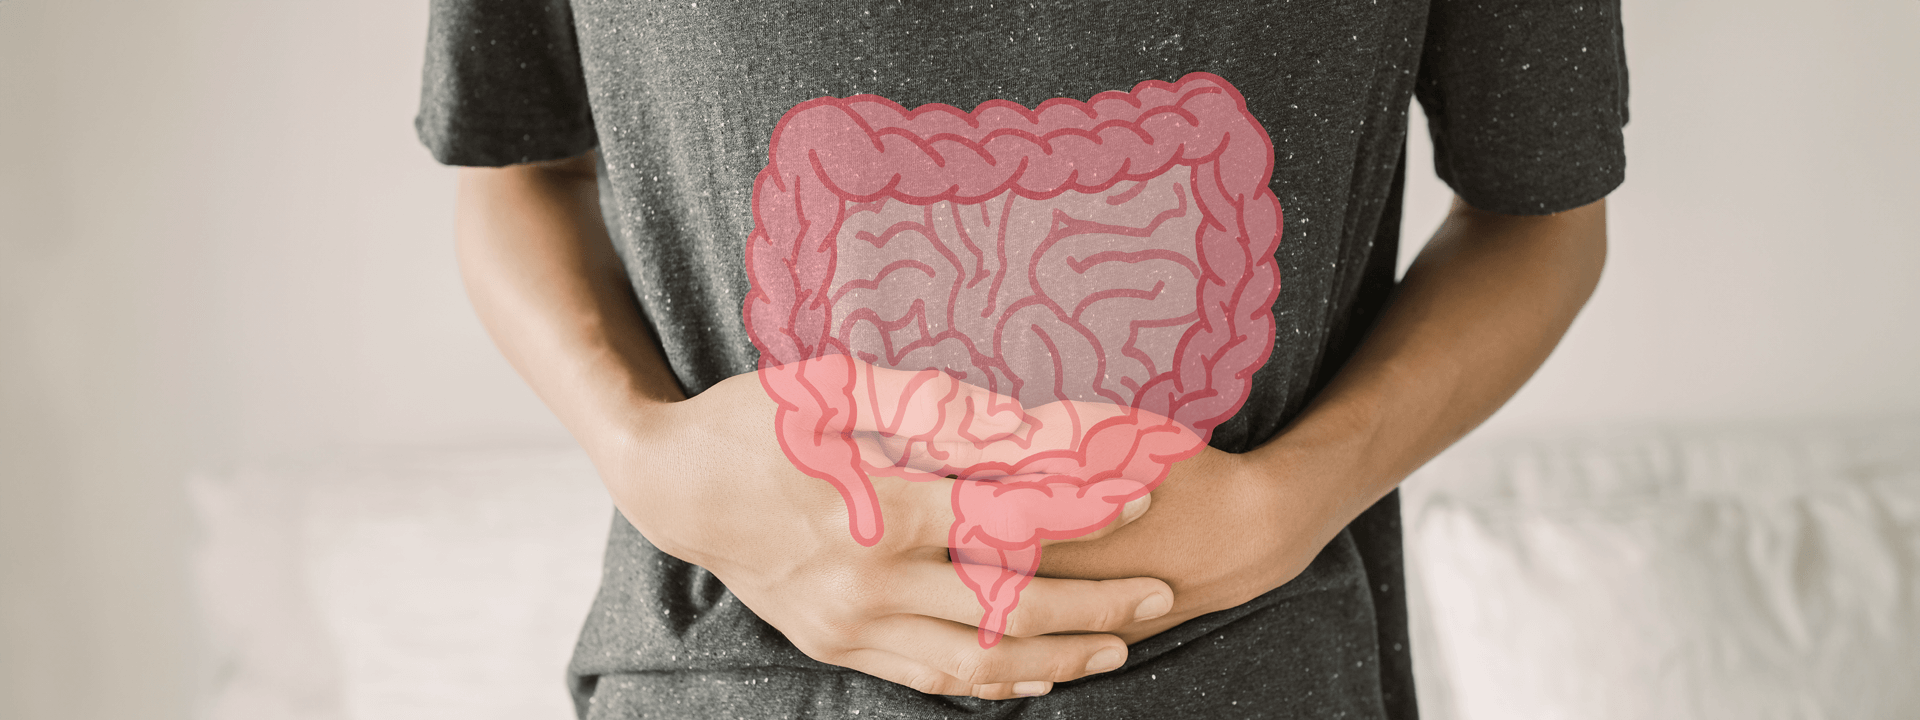 Leaky Gut: A Tricky Condition for Both Patients and Doctors